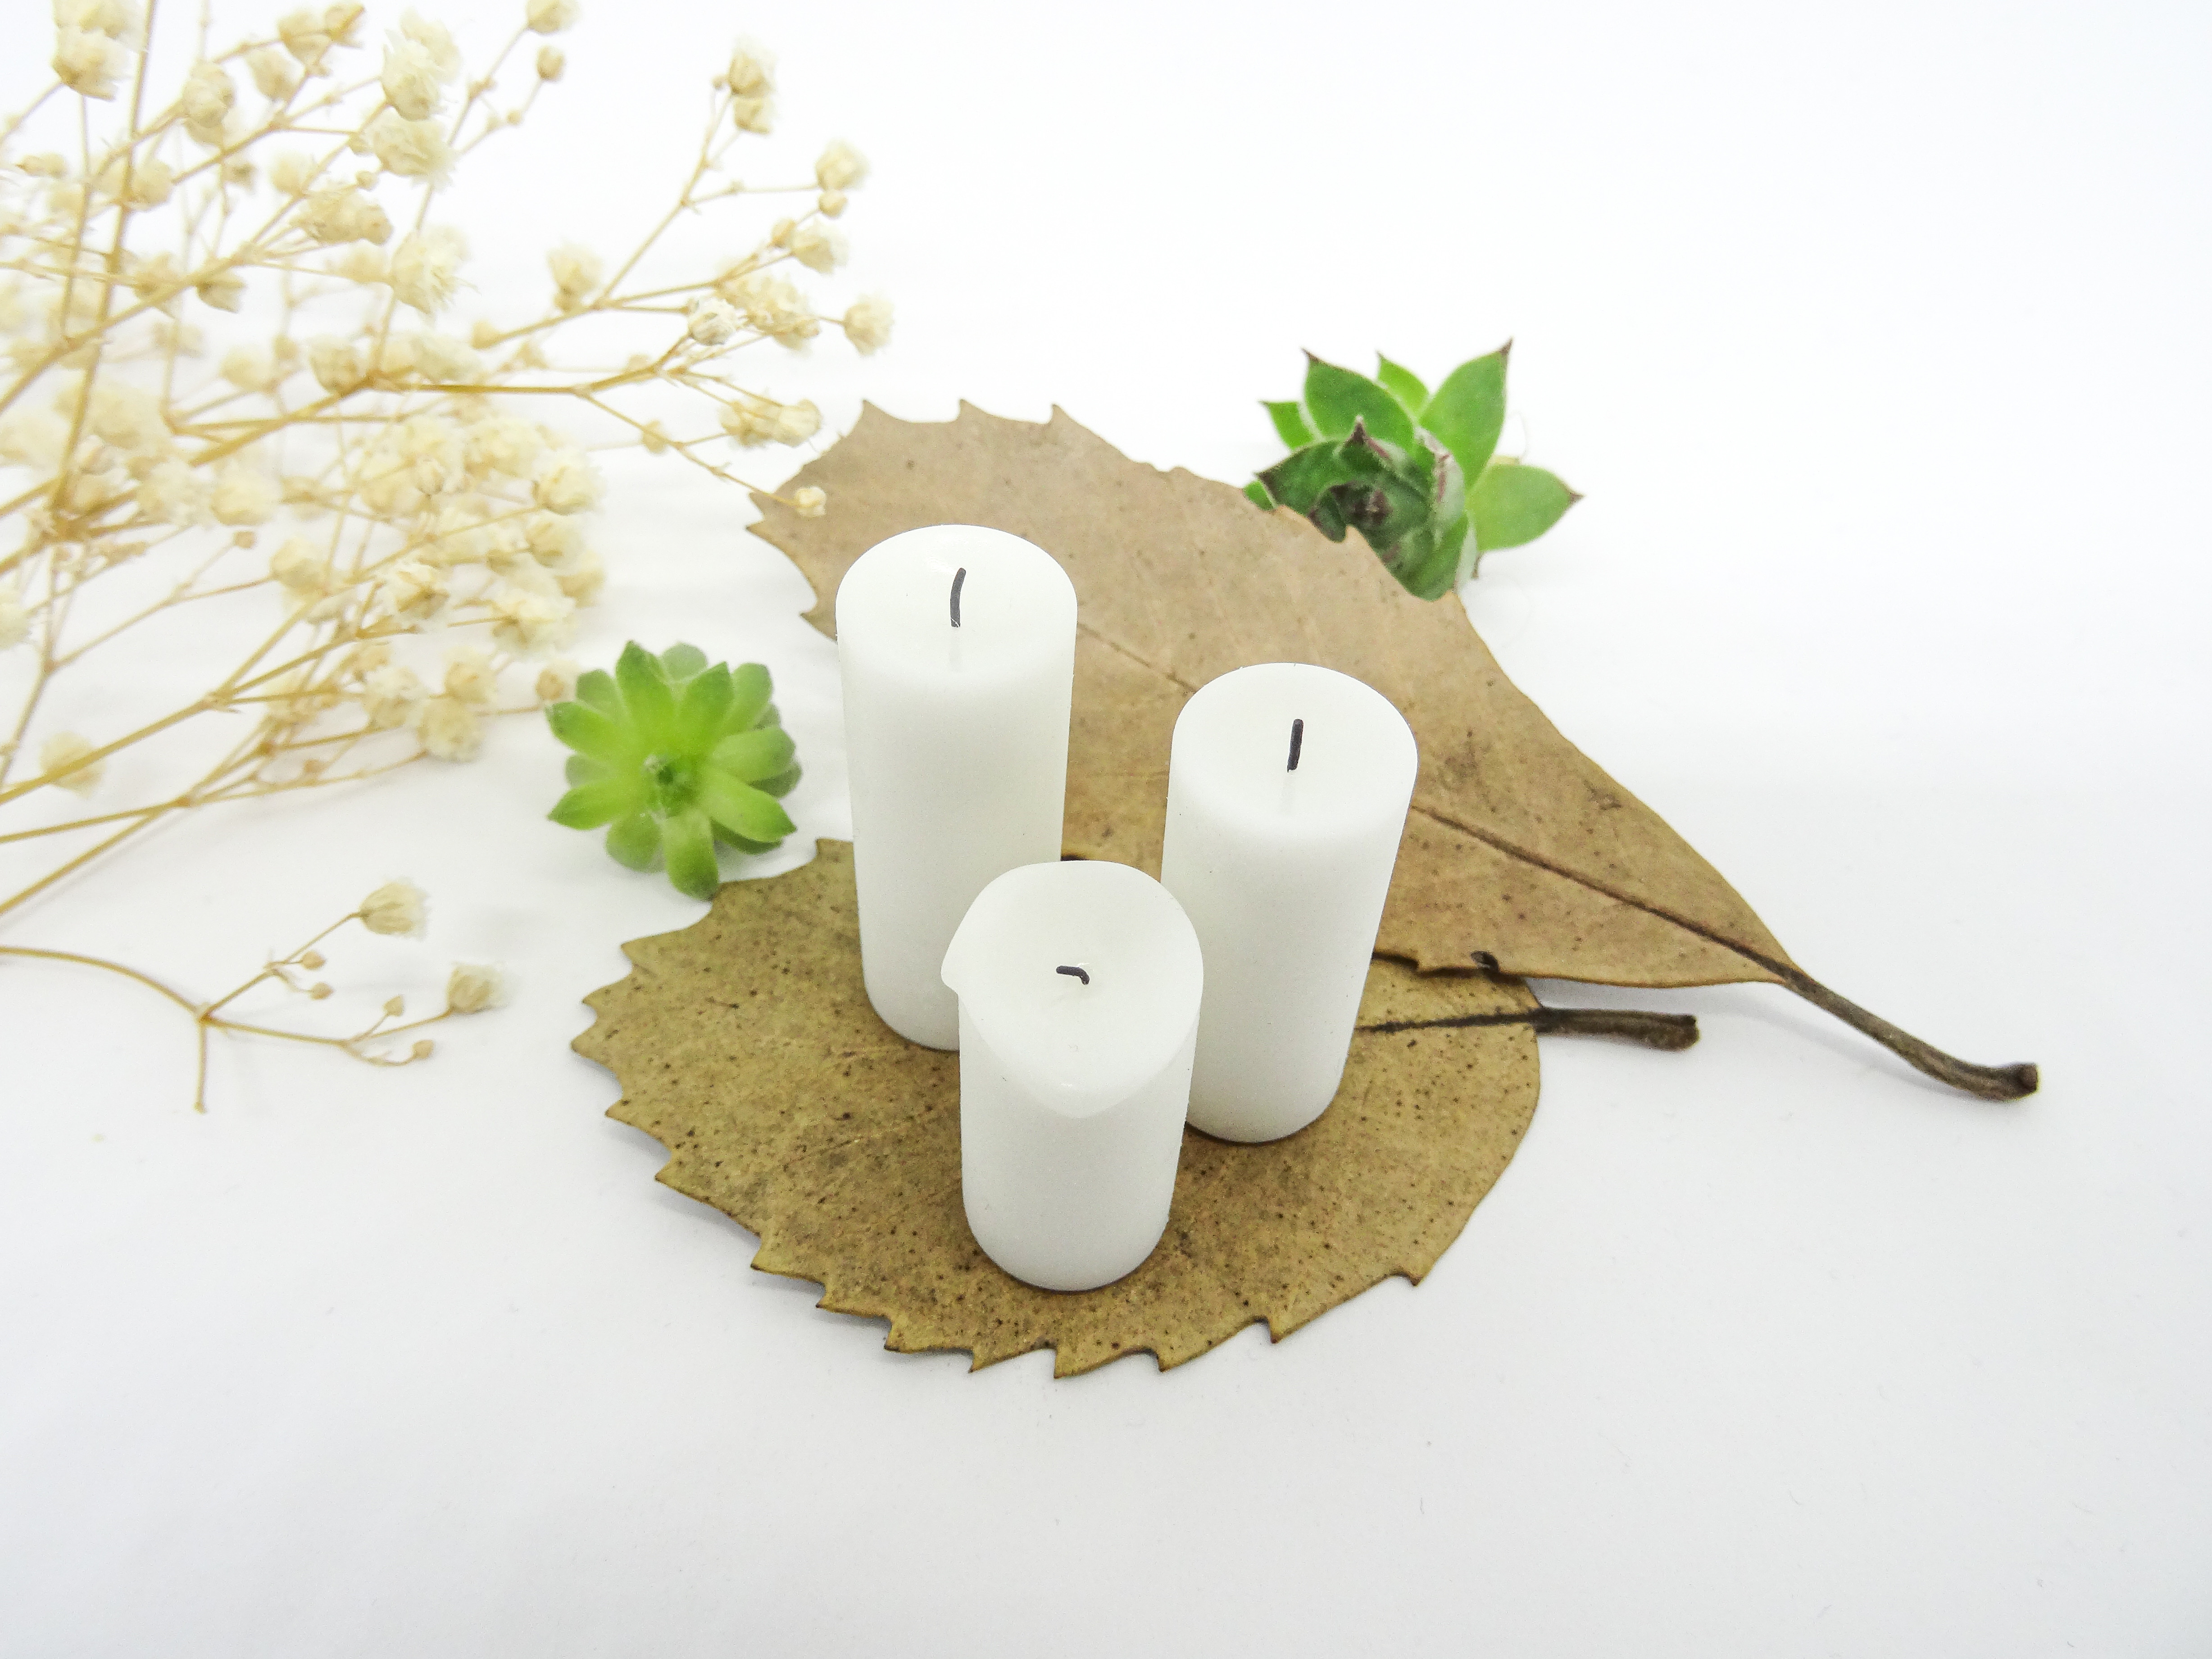 Candles - Set of 3 - 1/6 Miniature